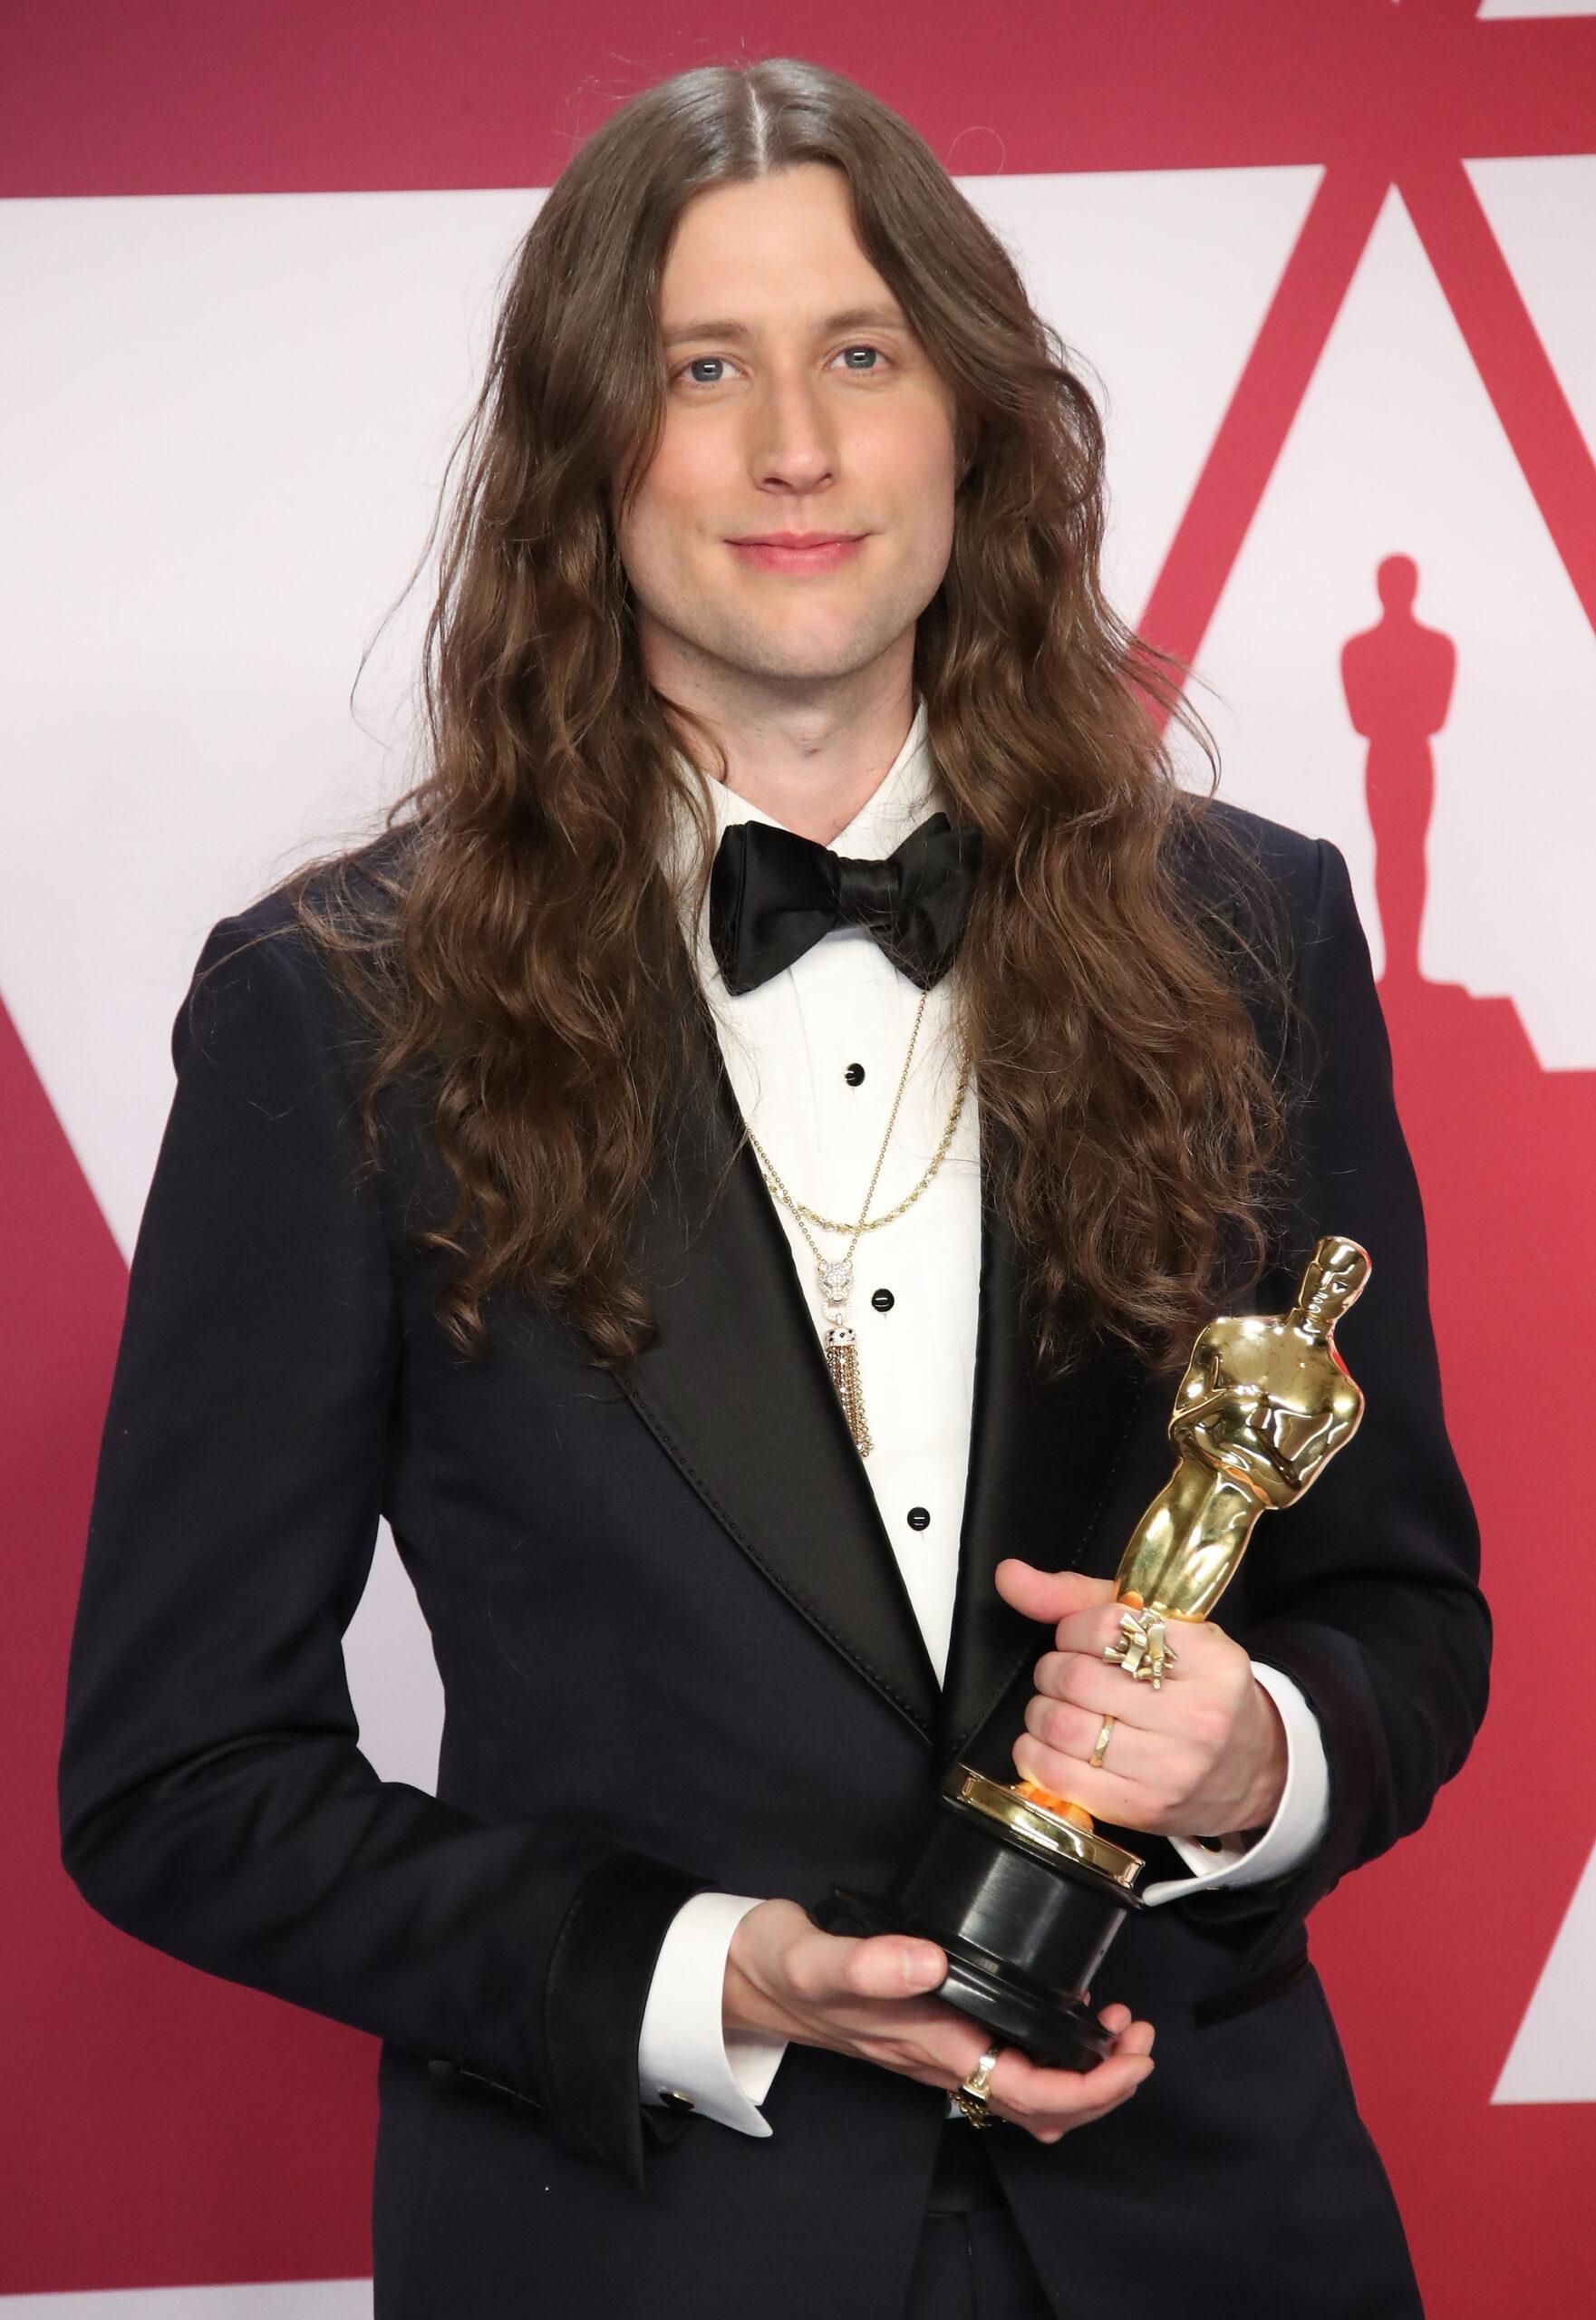 Ludwig Göransson holding an Oscar statuette in his hands.